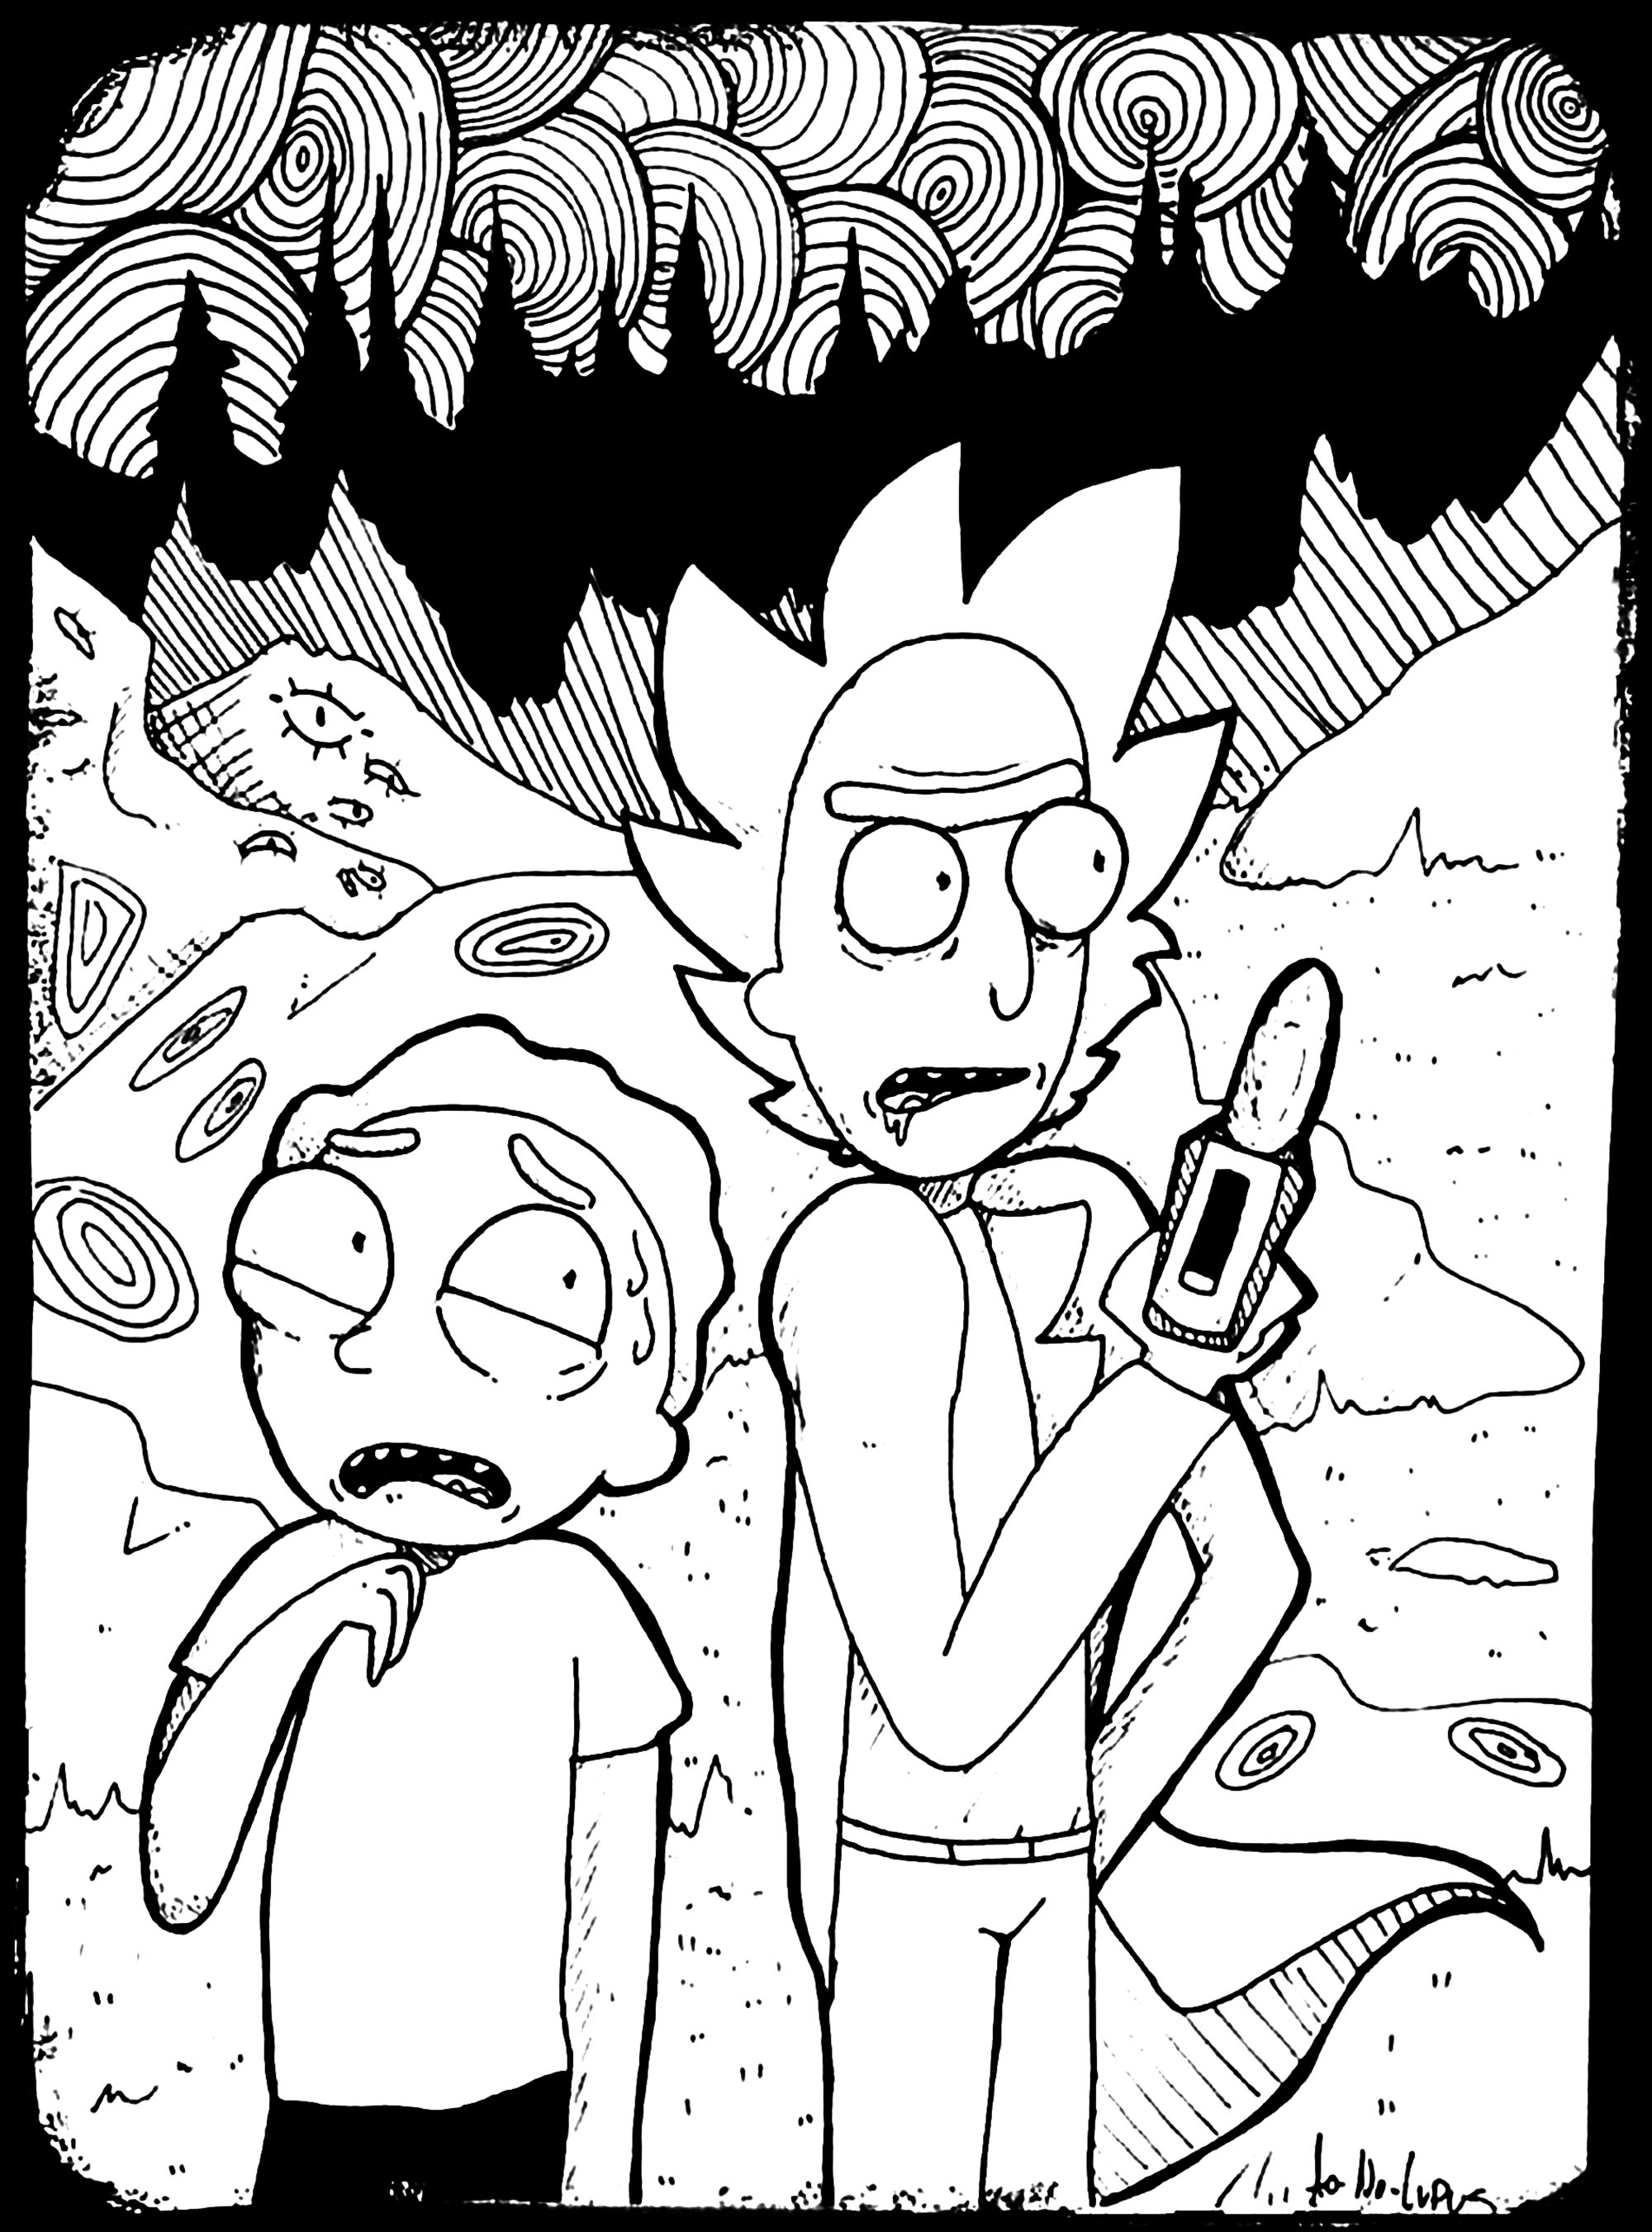 Rick and morty Coloring Pages for Adults